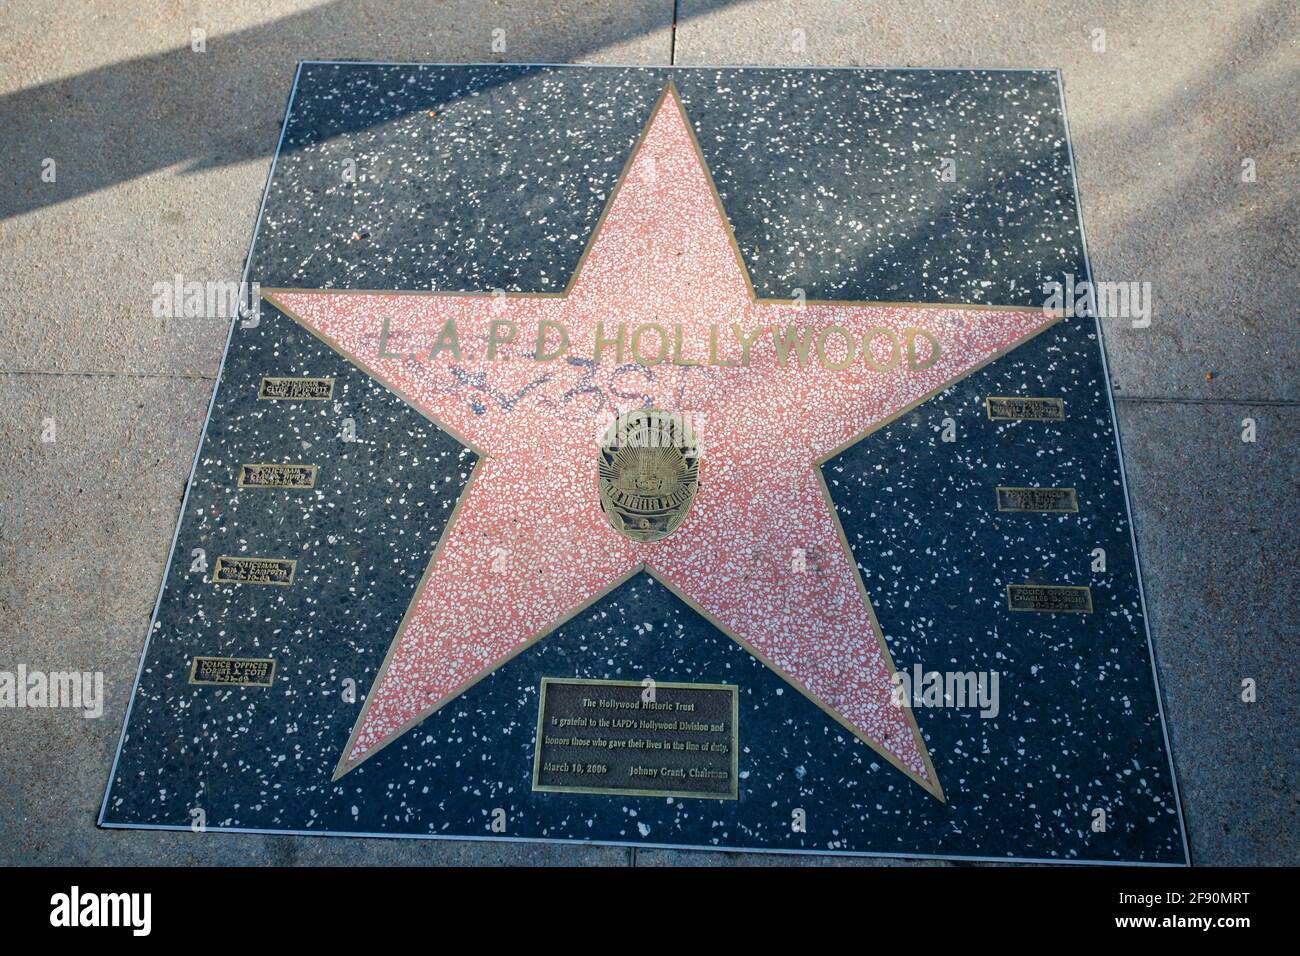 LAPD Star on the Hollywood Walk of Fame, Los Angeles, California, USA Stock Photo